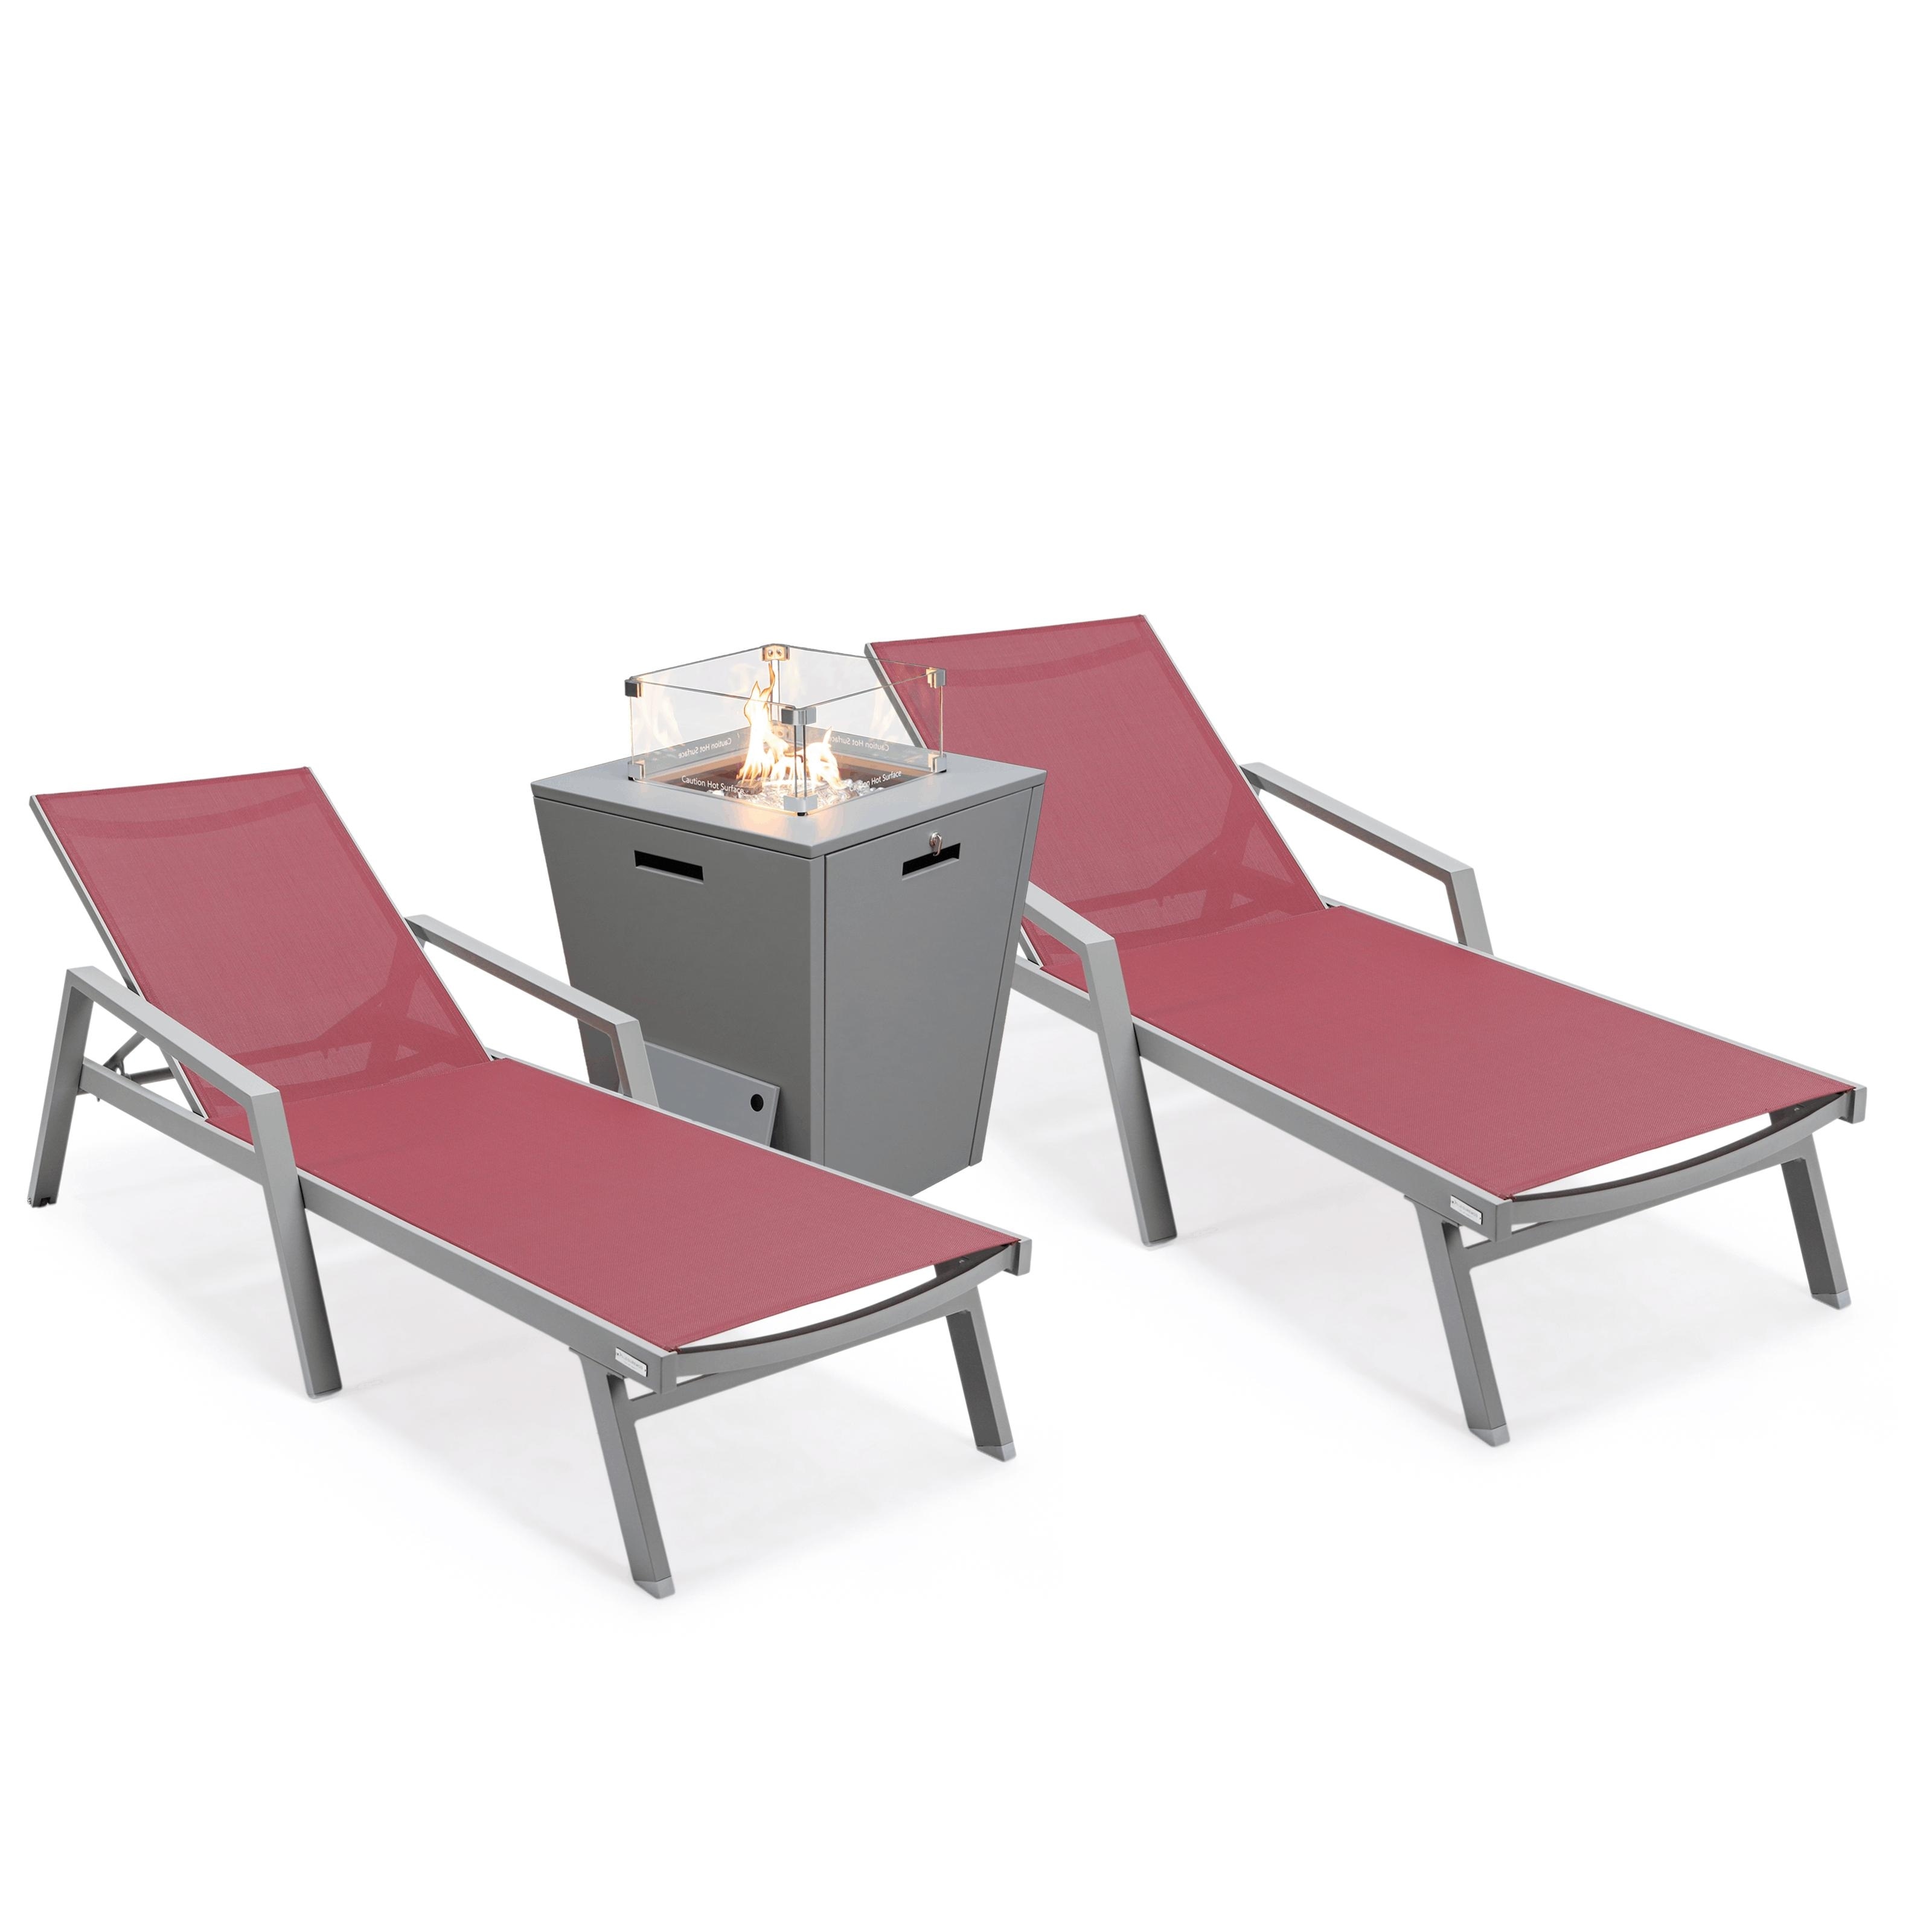 Leisuremod Marlin Chaise Lounge Chair Set Of 2 With Arms And Fire Pit Table